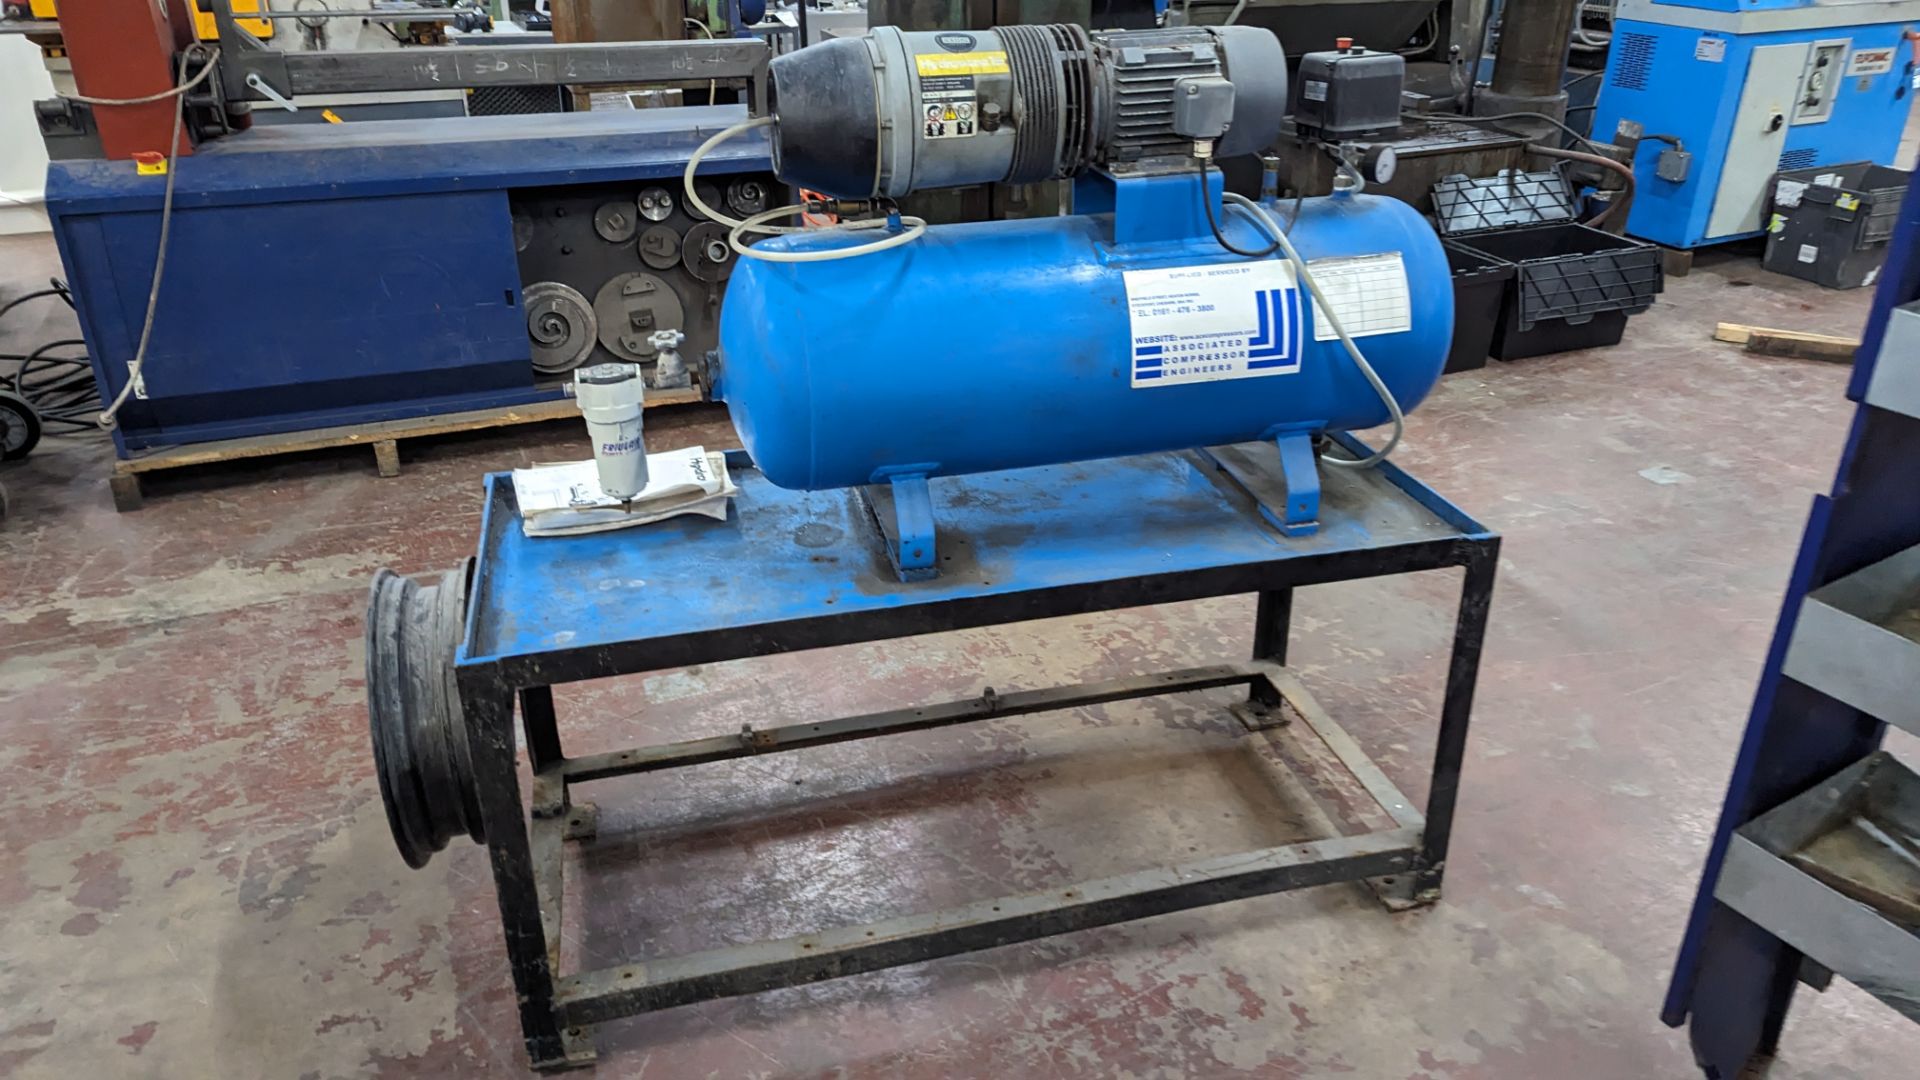 Hydrovane all in one compressor with welded horizontal air receiver, mounted on heavy duty metal tab